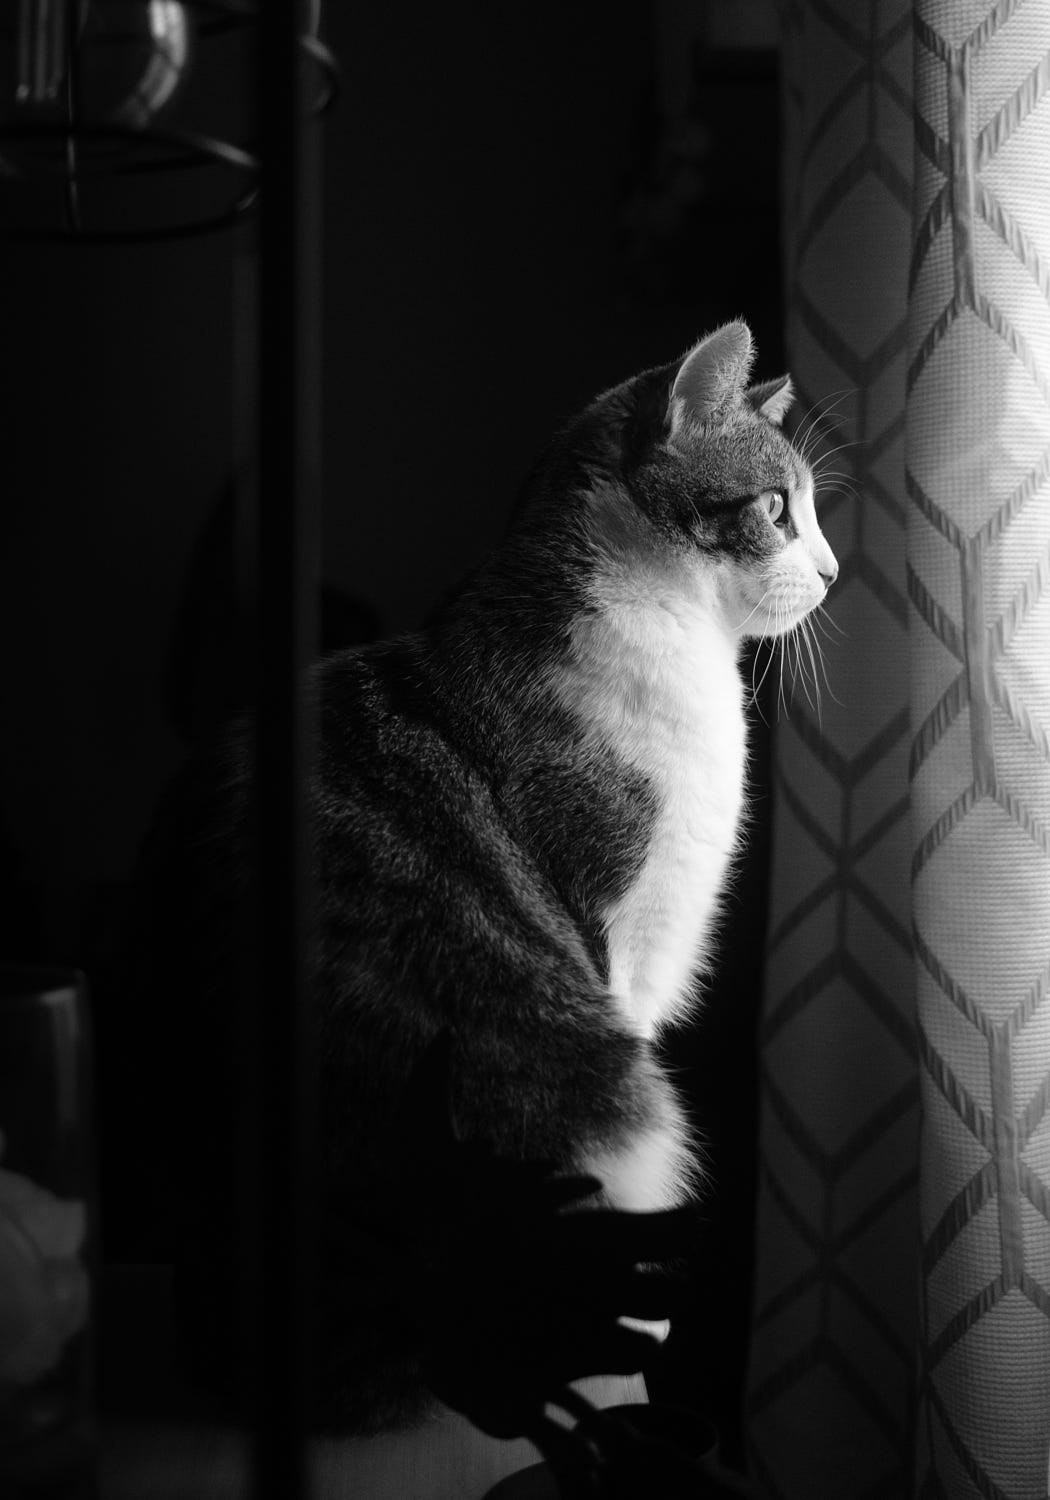 Ernie the cat looking out the window